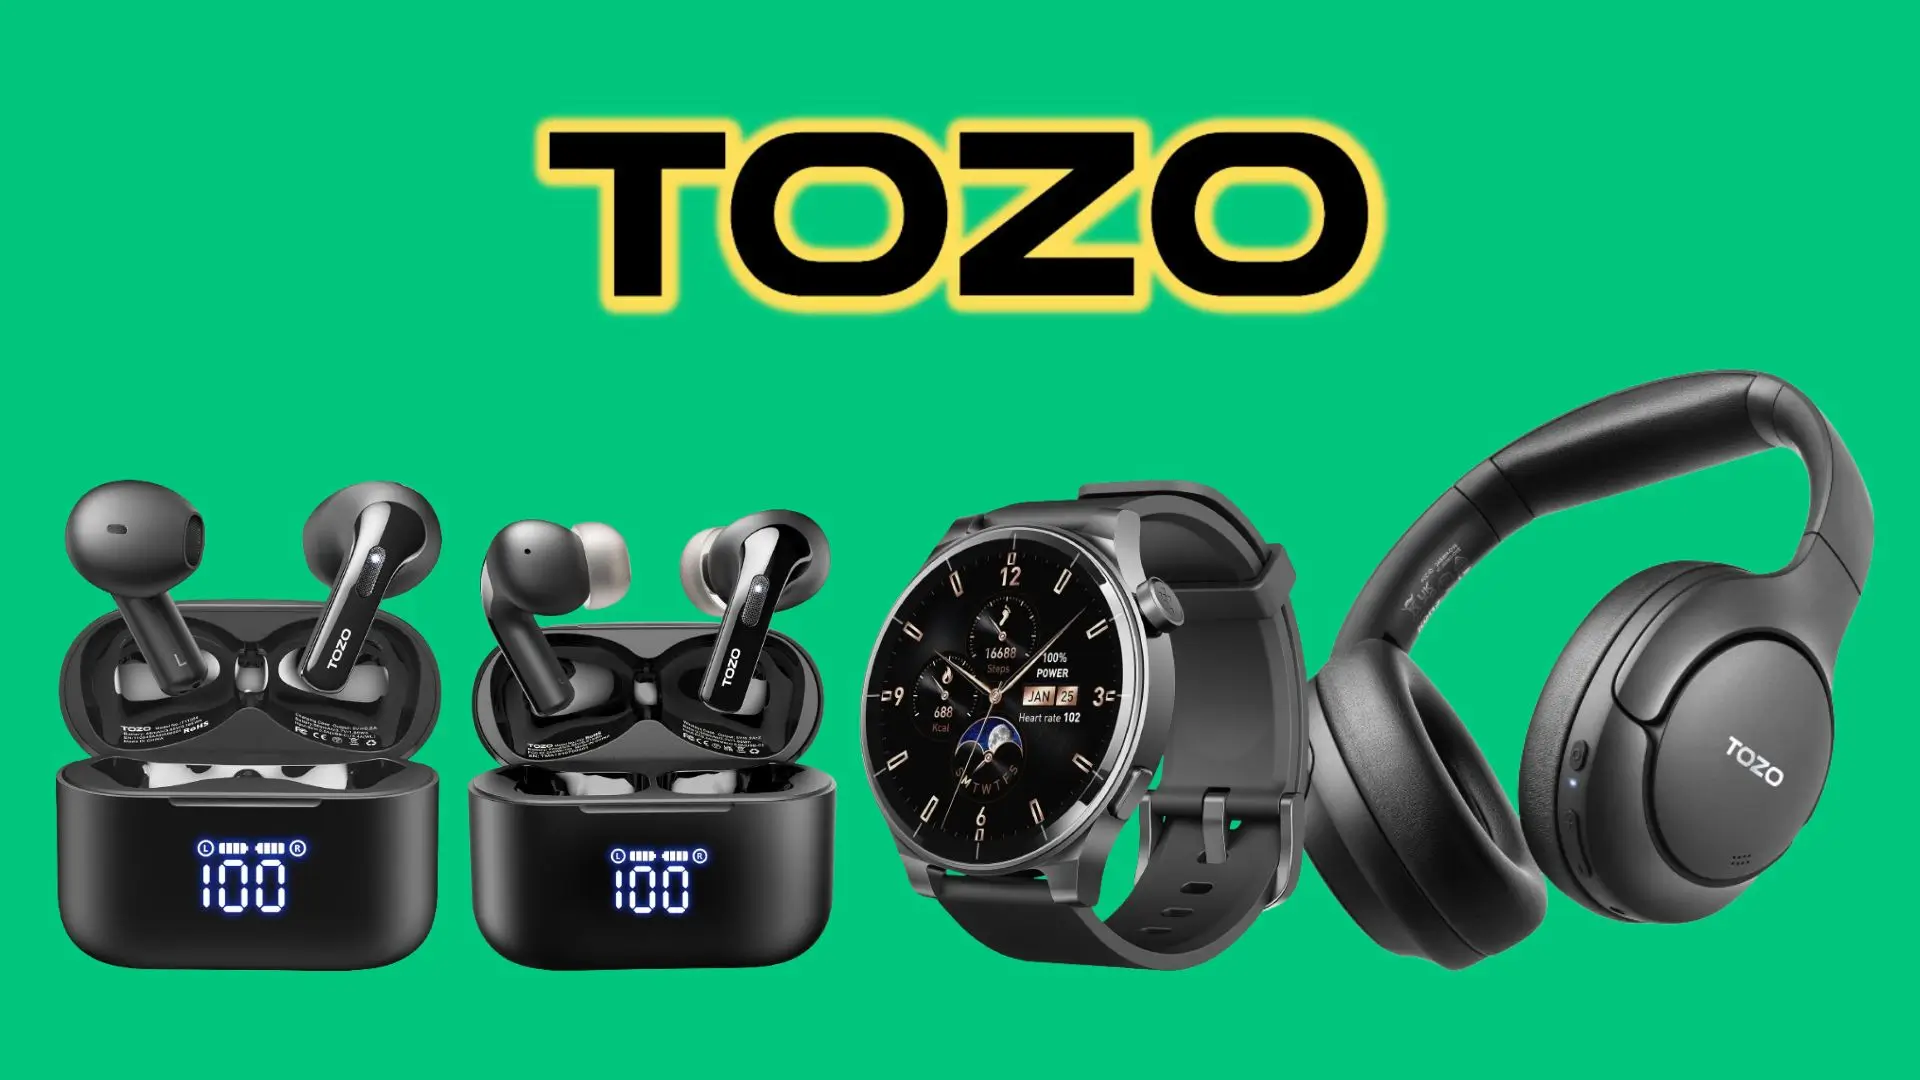 Is Tozo a Good Brand